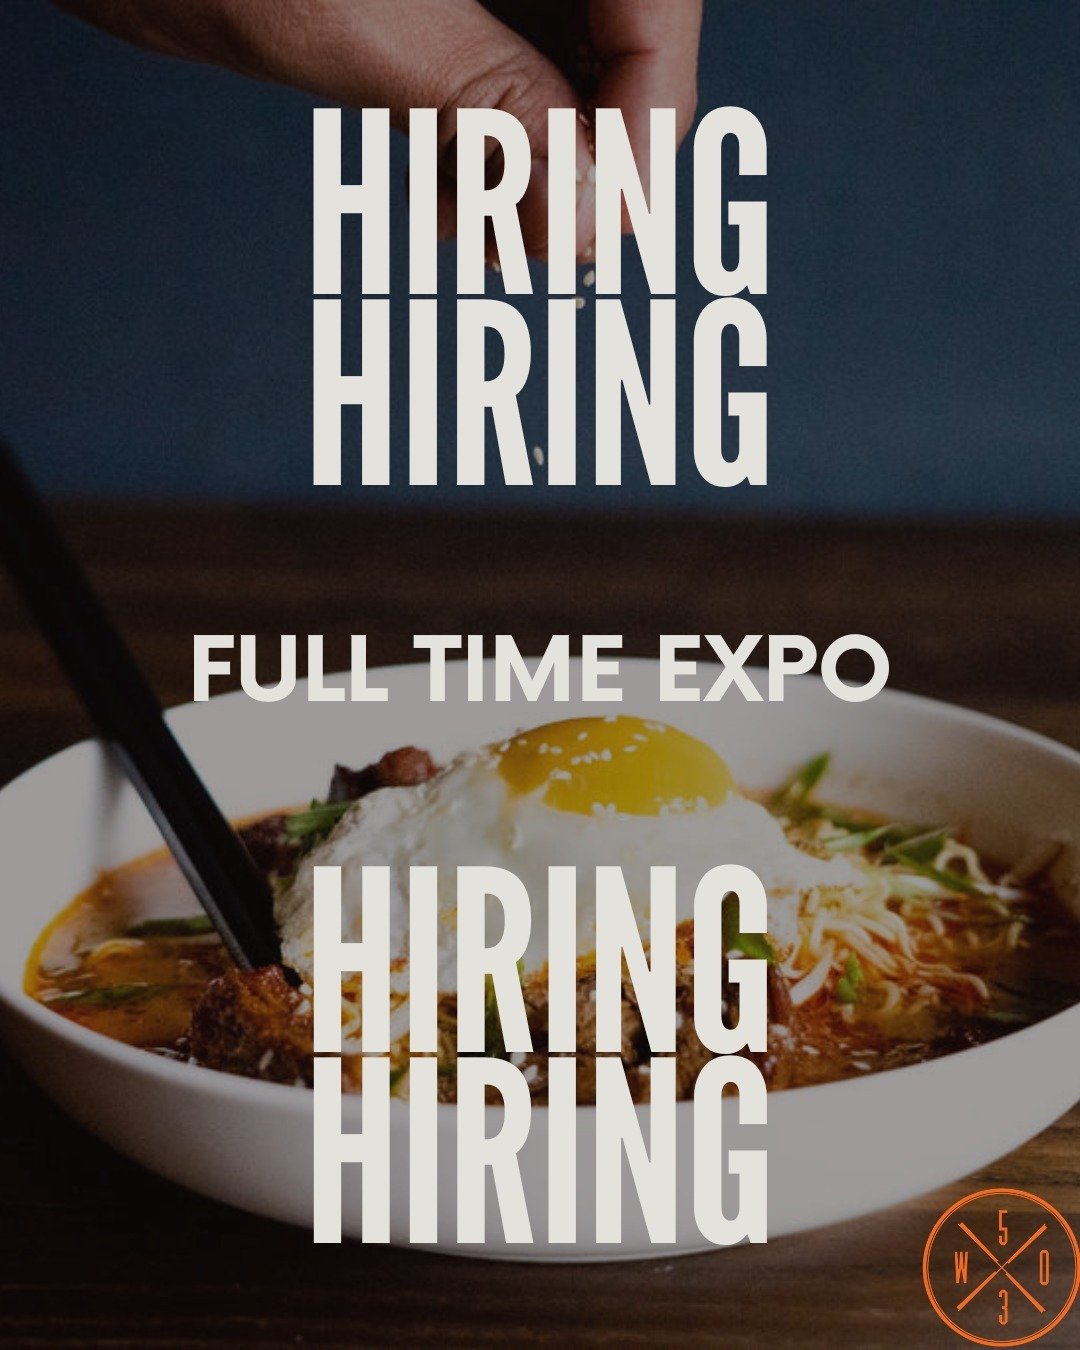 503W is growing our team and currently looking for people with a passion for food, drinks and commitment to quality service. Come join our fun, fast-paced and friendly team.

We are Now Hiring for a full-time expo.

To Apply: email your resume to emi